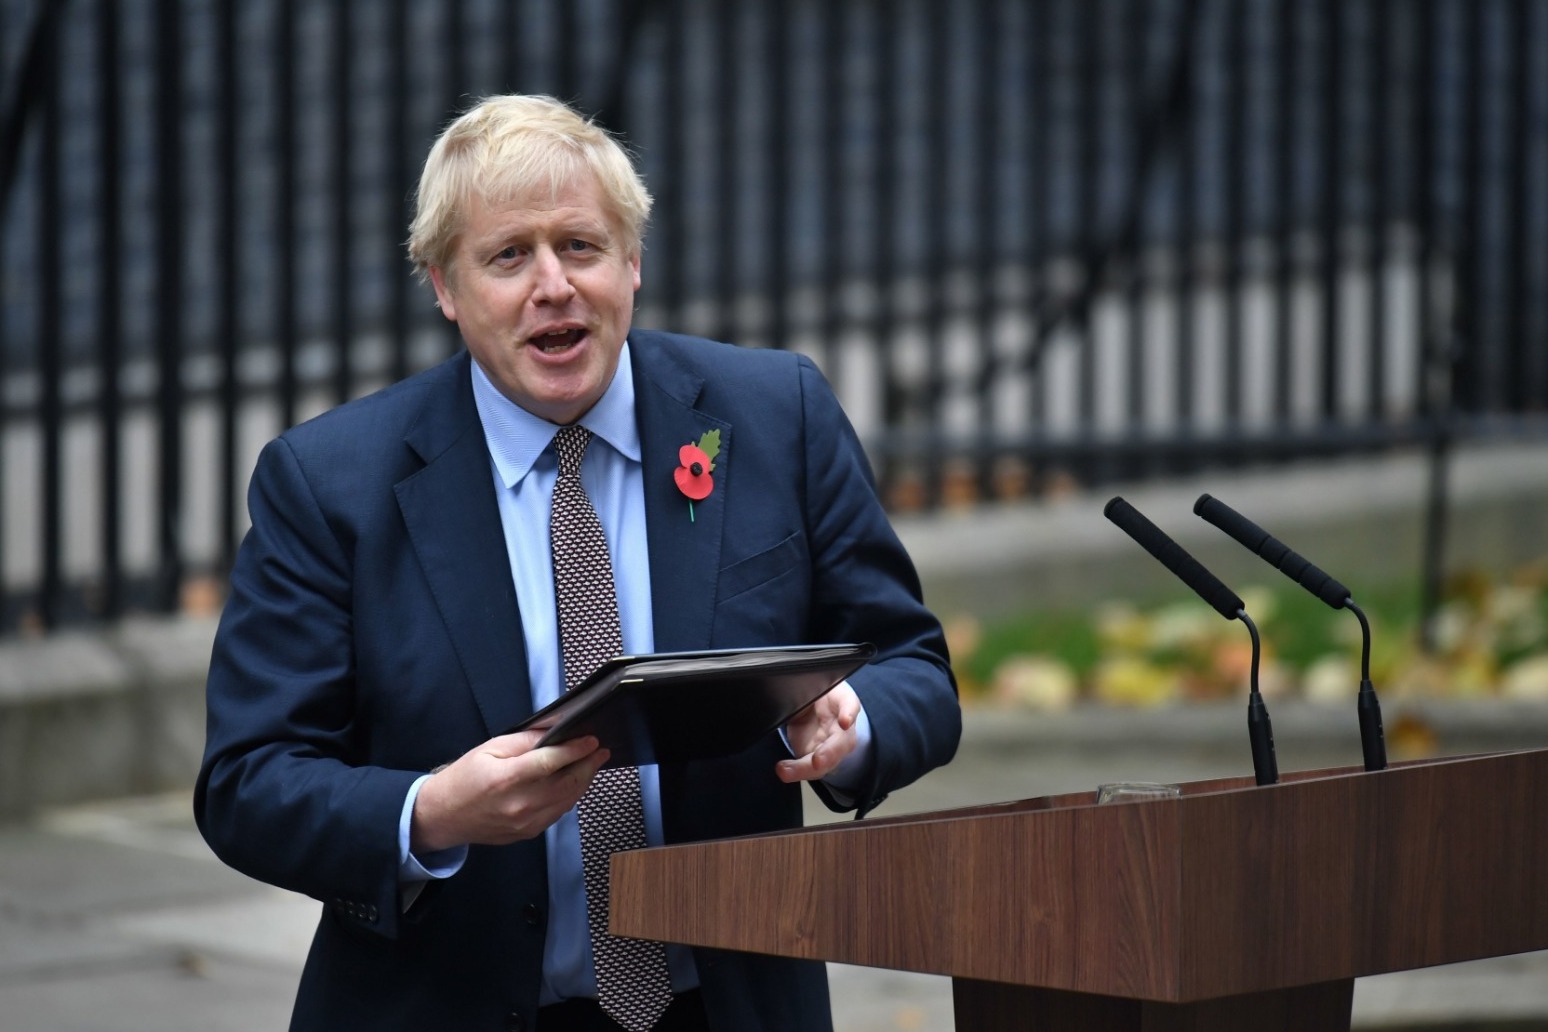 BORIS JOHNSON FIRES STARTING GUN ON ELECTION CAMPAIGN AFTER CABINET RESIGNATION 